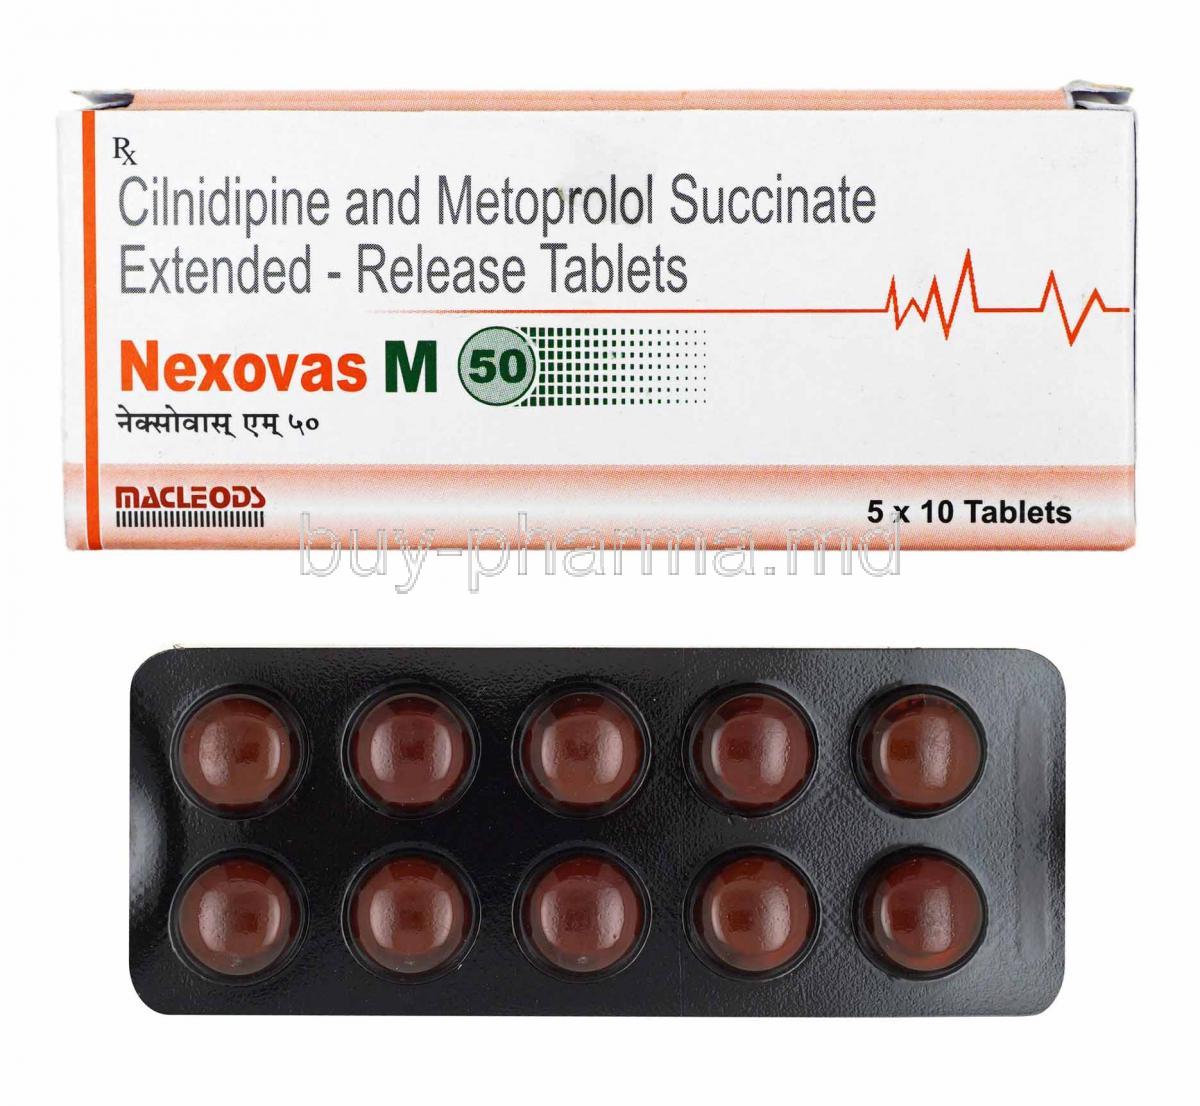 Nexovas M, Cilnidipine and Metoprolol Succinate box and tablets